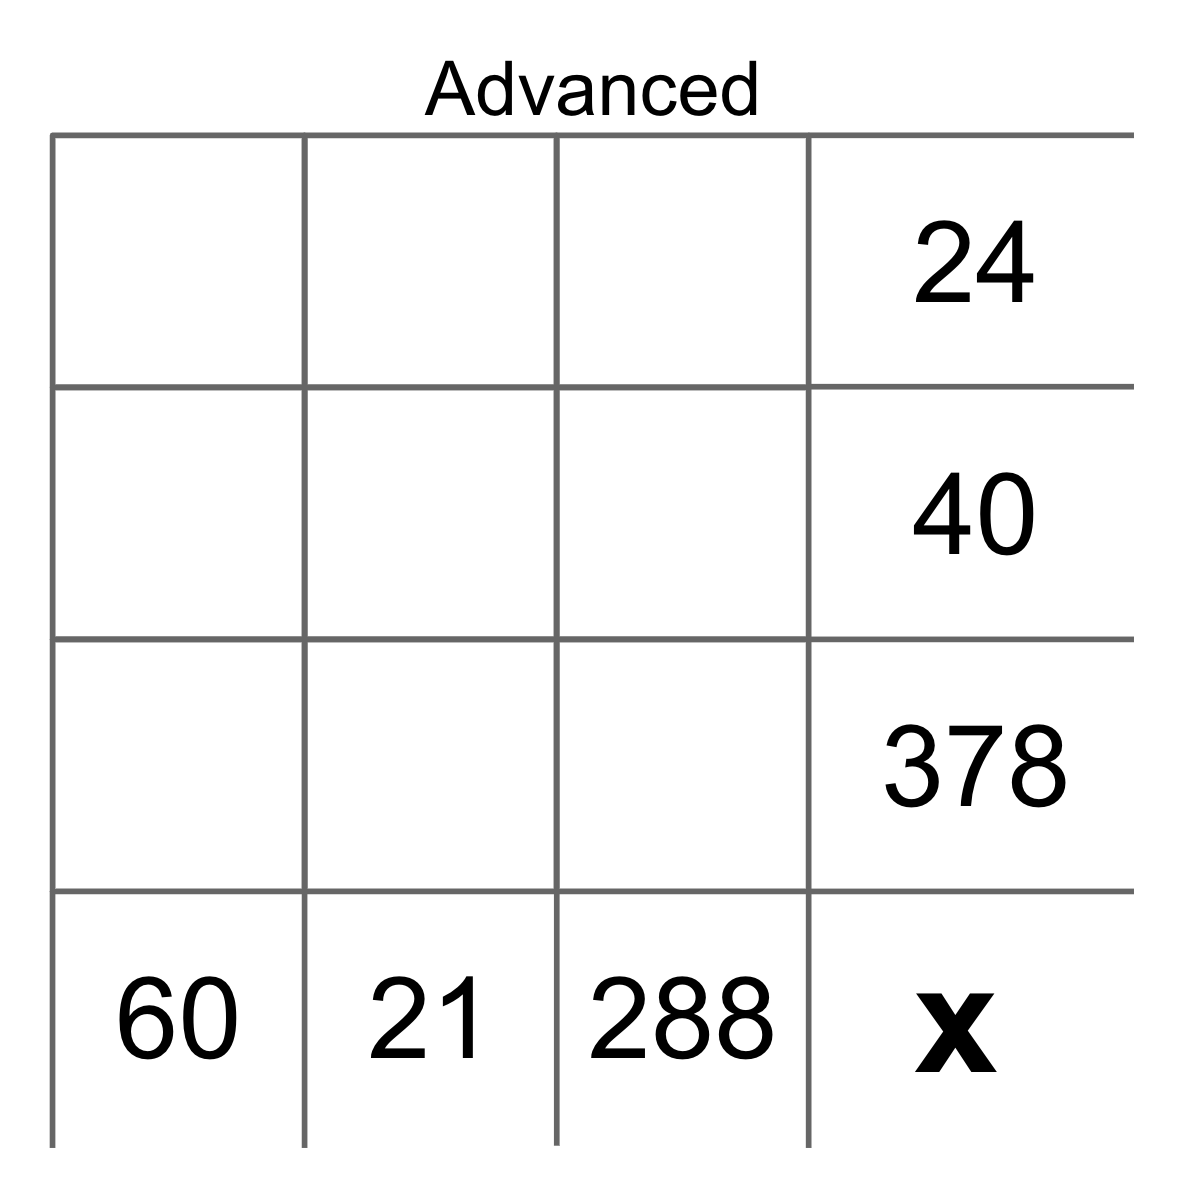 A three-by-three yohaku puzzle where numbers need to multiply down to the products 60, 21, and 288 (at the bottom), as well as across to the products 24, 40, and 378 (down the right side.)